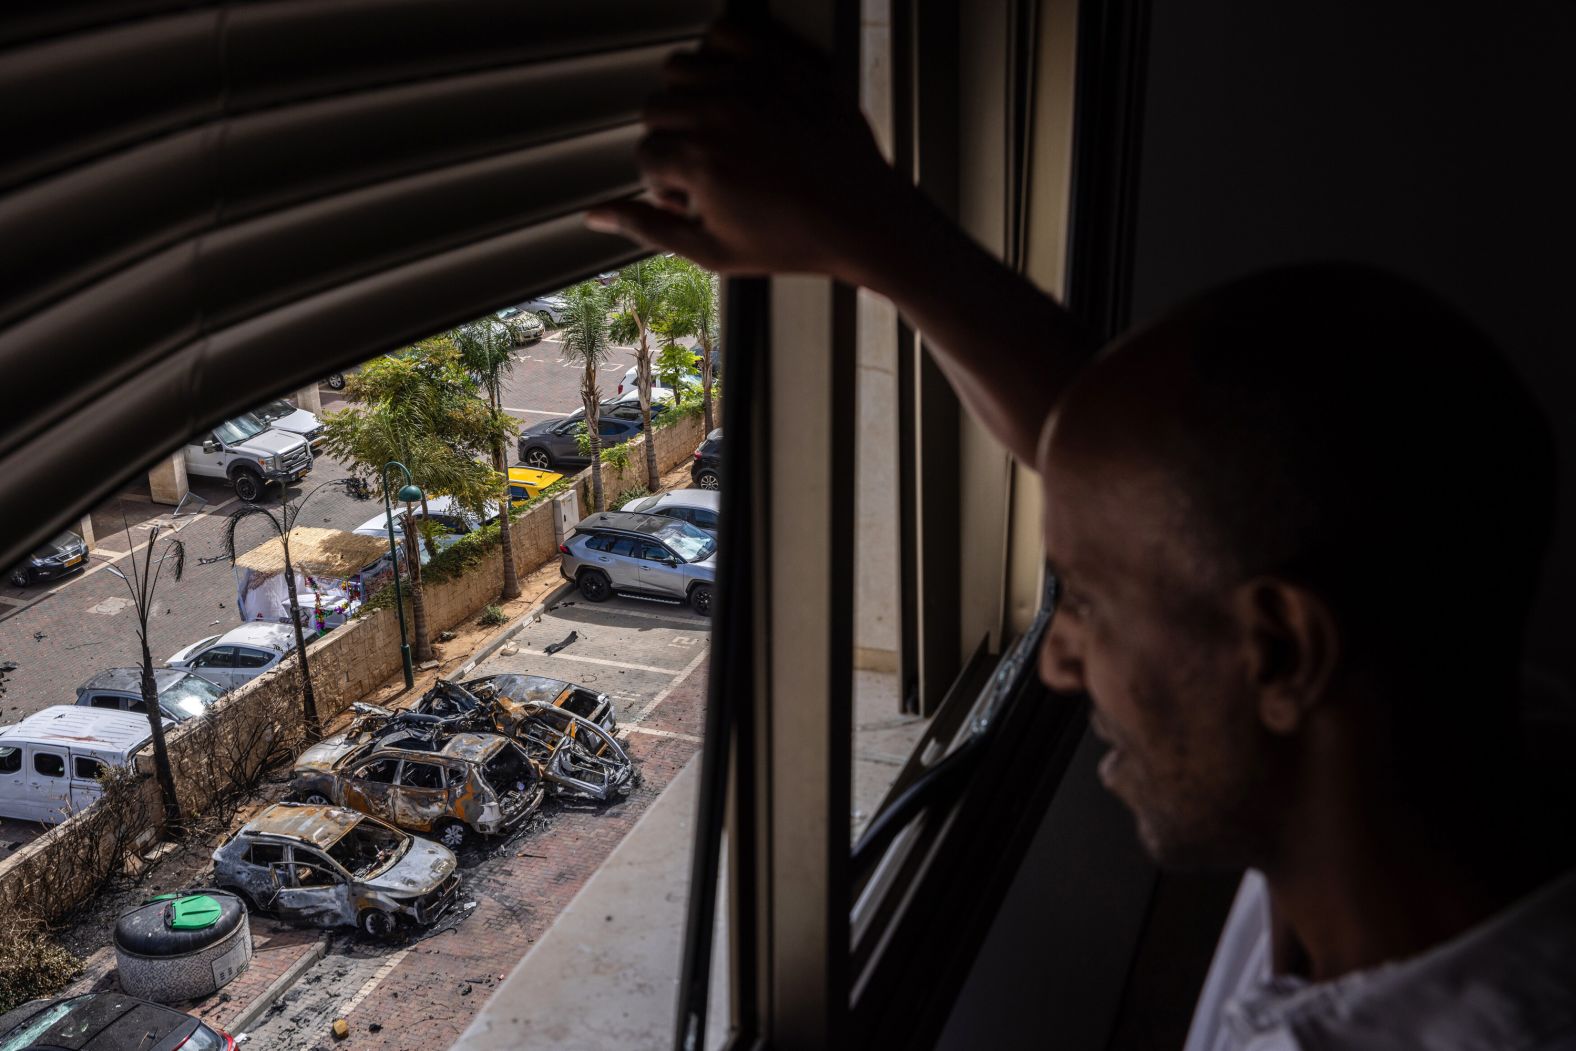 From the window of his family's apartment, a man surveys damage from a rocket that struck a parking lot in Ashkelon, Israel, on Saturday, October 7.